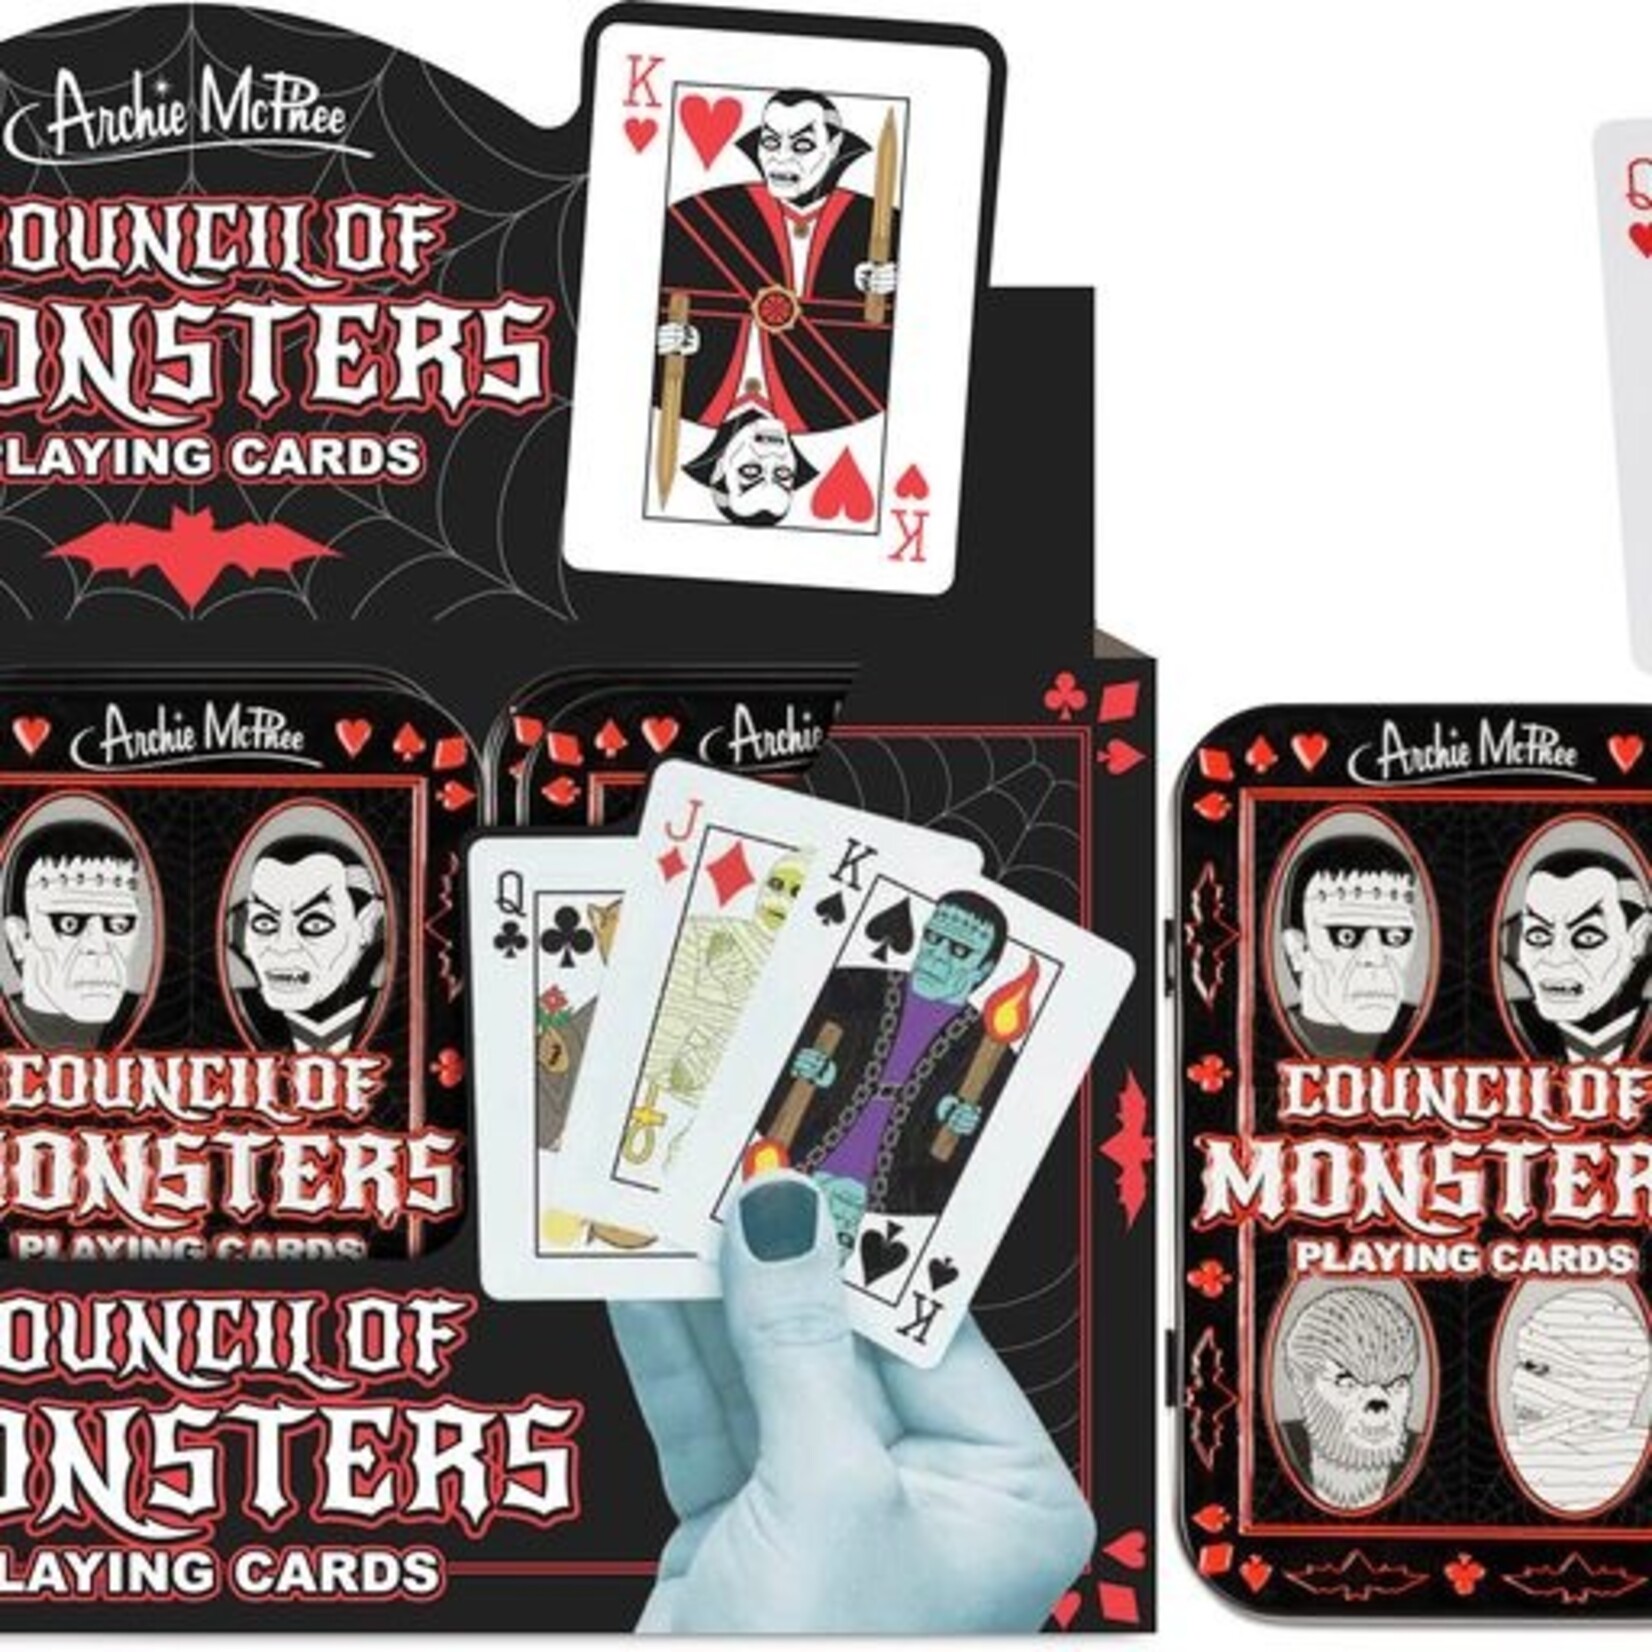 Gift Council of Monsters Playing Cards